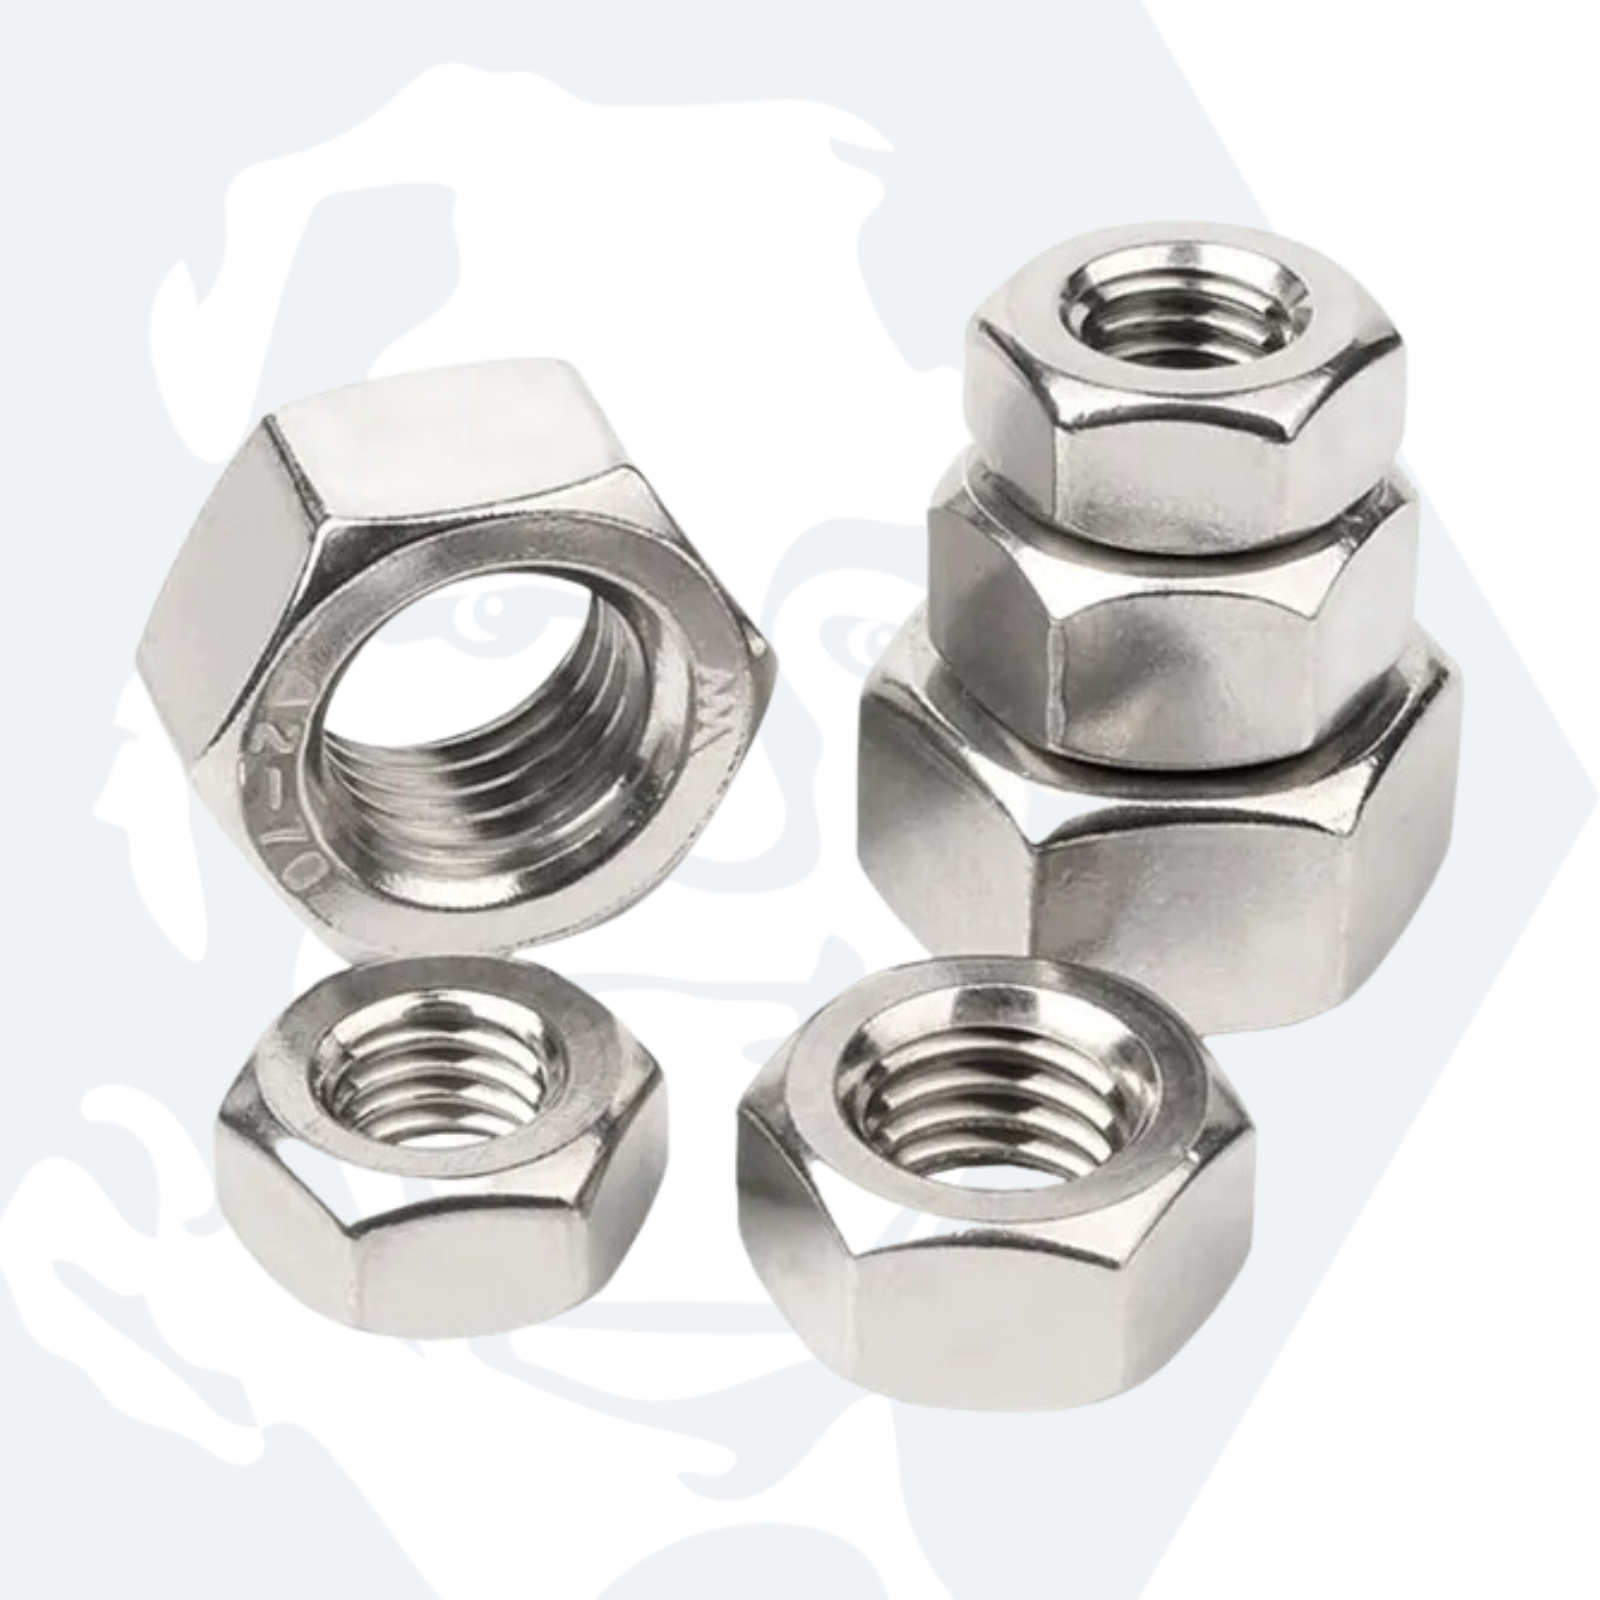 M6 Hexagon Nuts (DIN 934) - Stainless Steel (A2)